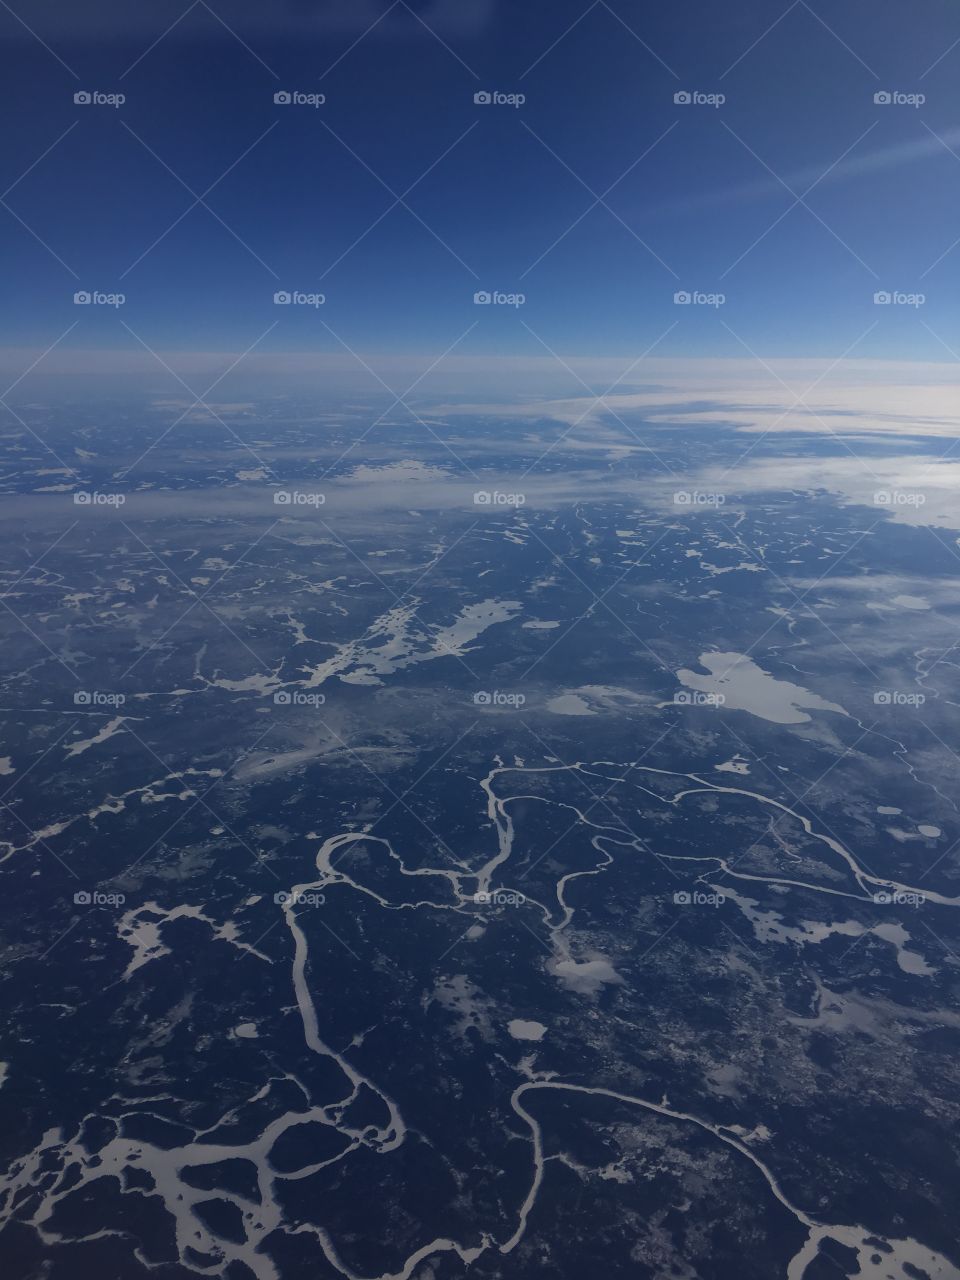 View from above, Northern Canada